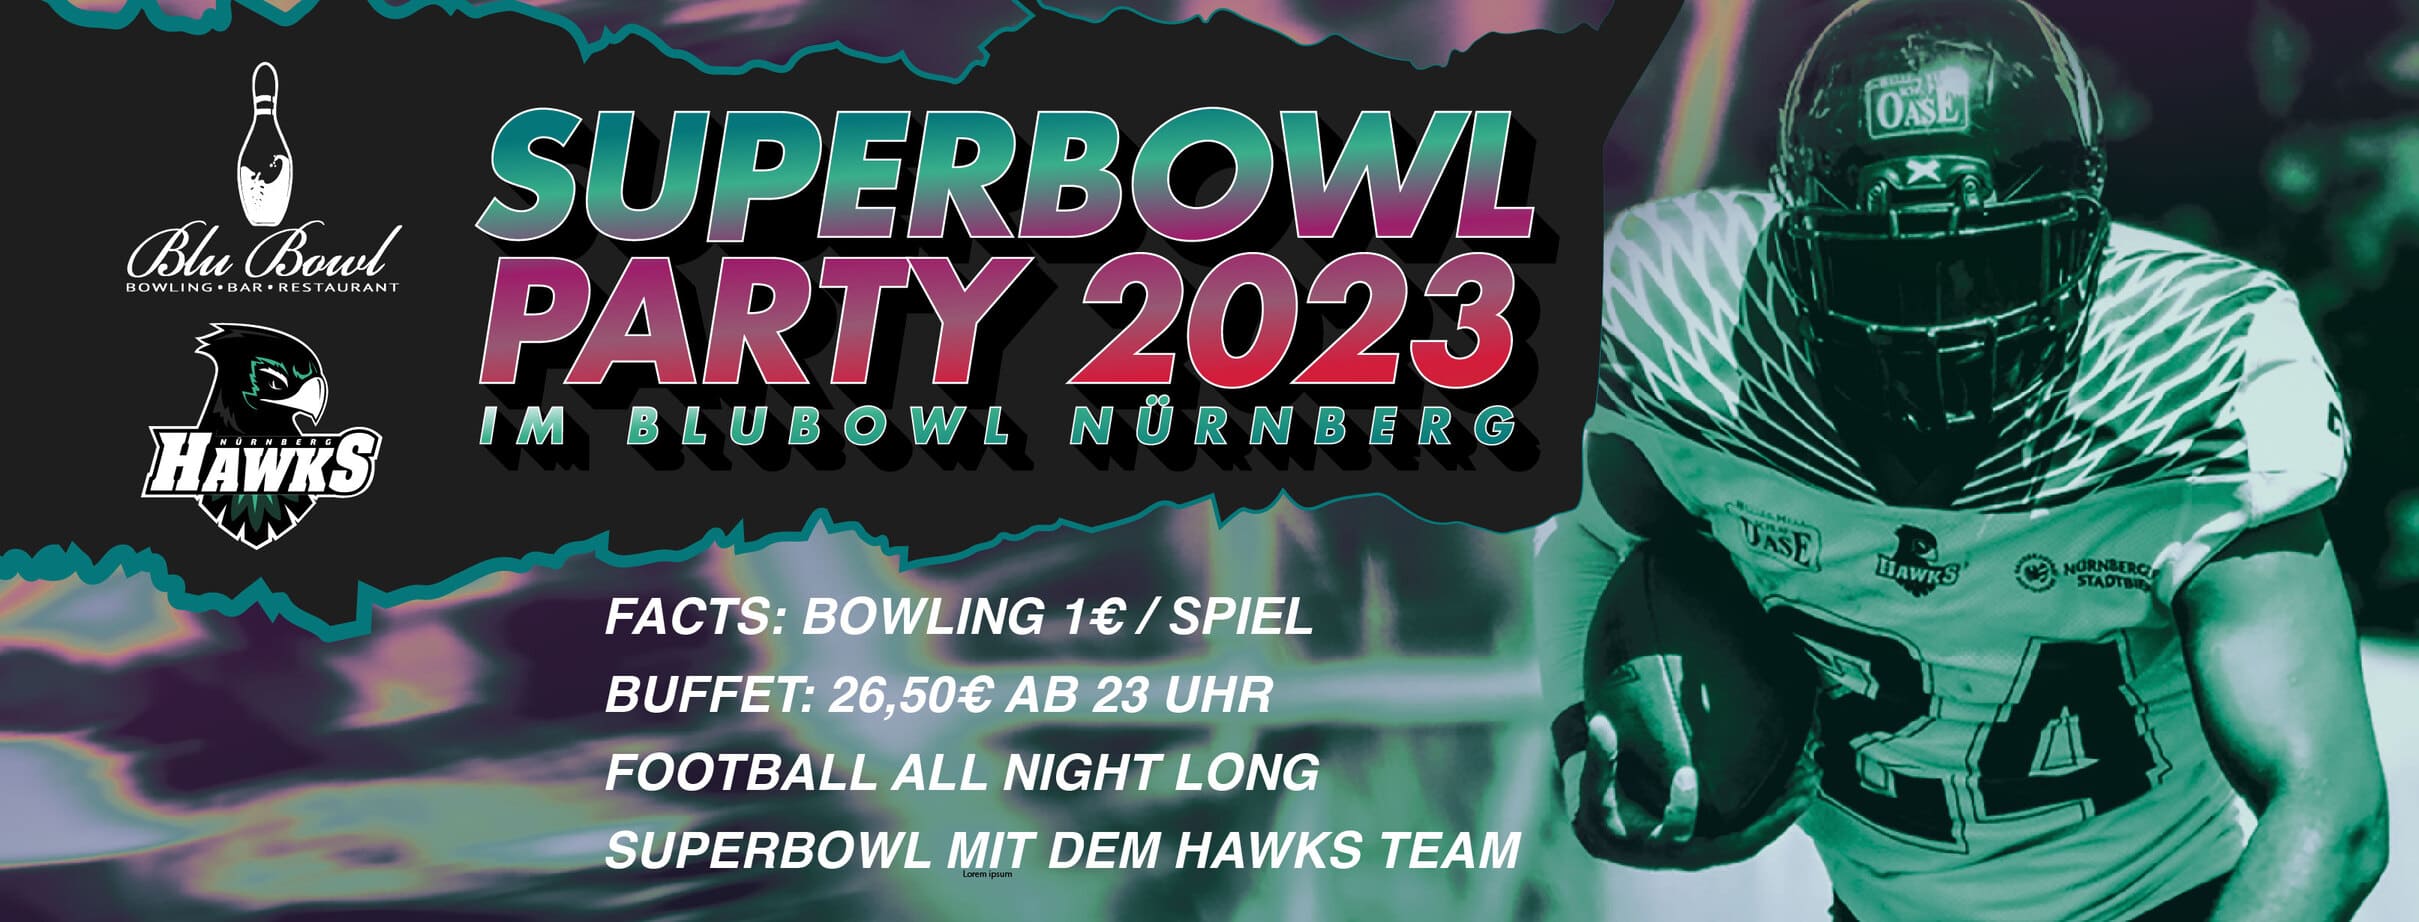 SUPERBOWL-PARTY 2023